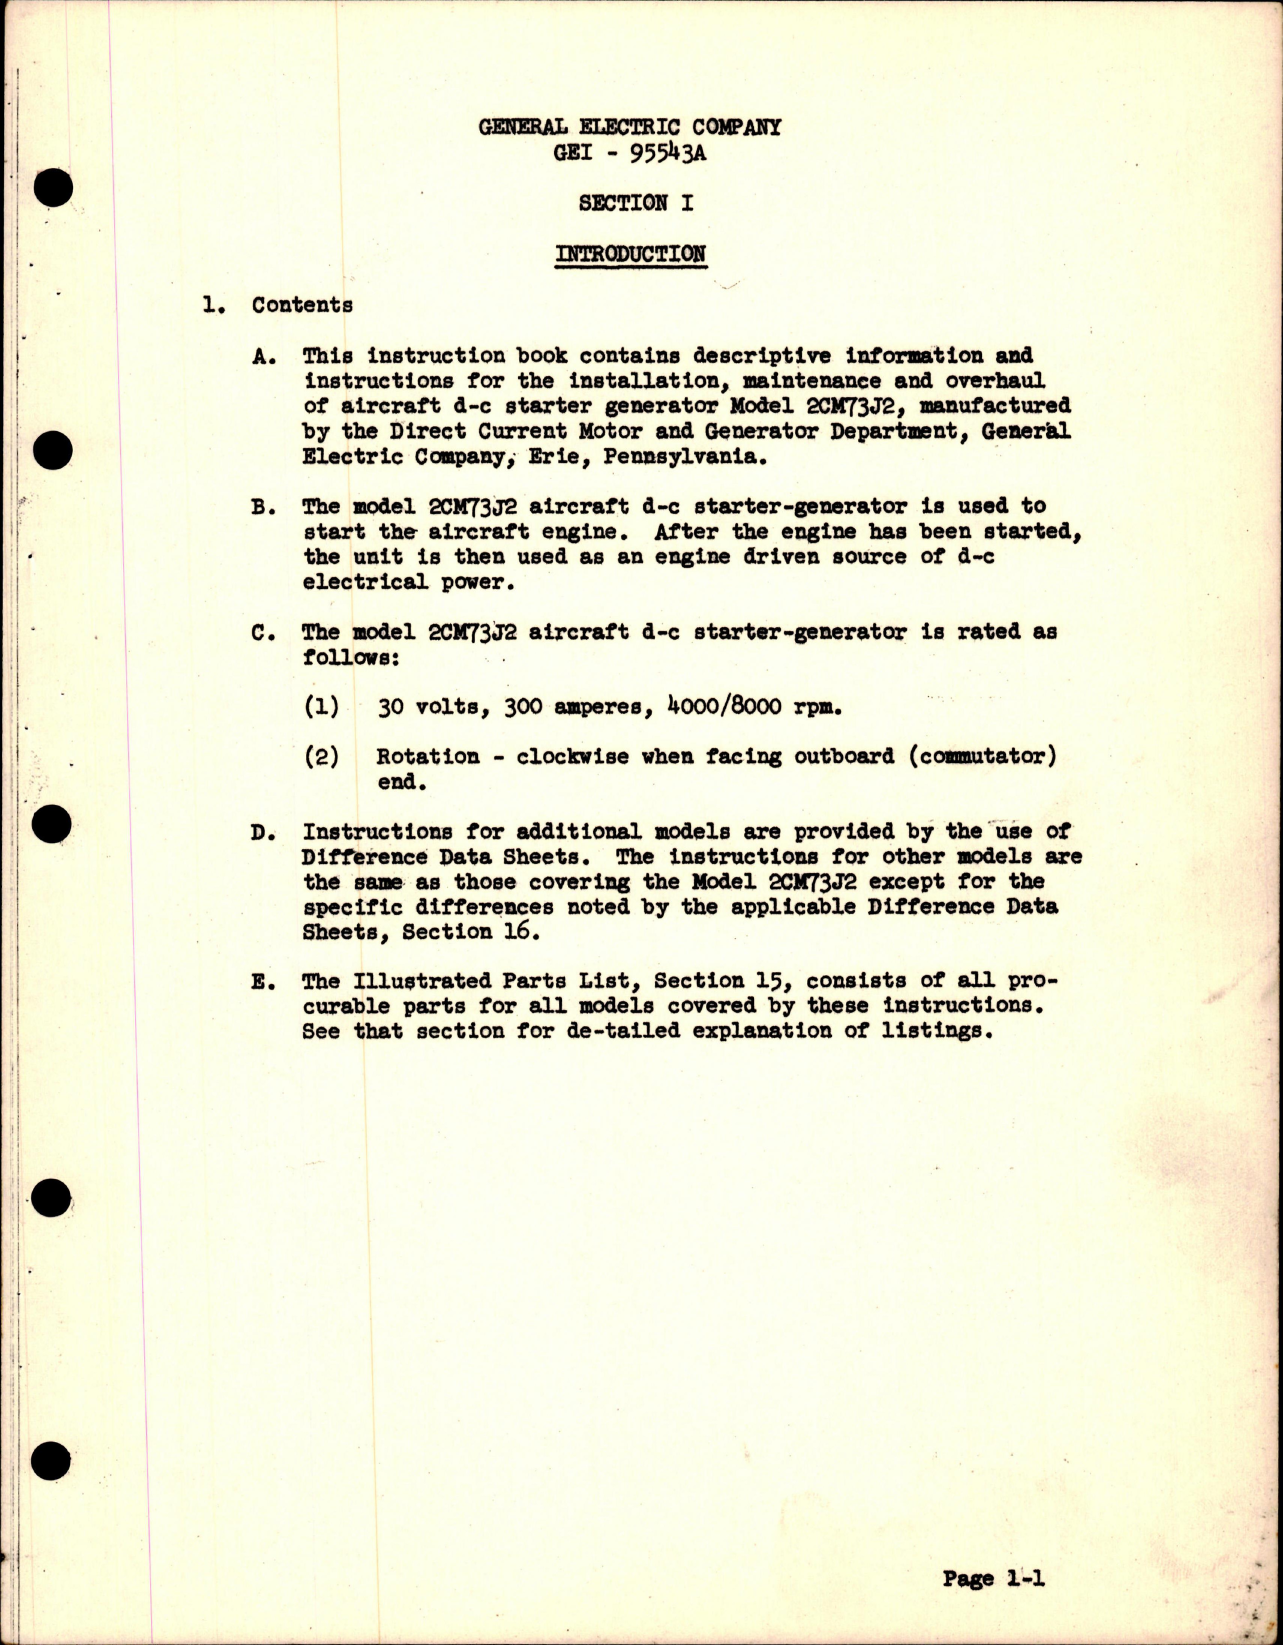 Sample page 5 from AirCorps Library document: Instructions for Aircraft D-C Starter Generator - Model 2CM73J1A and 2CM73J2 